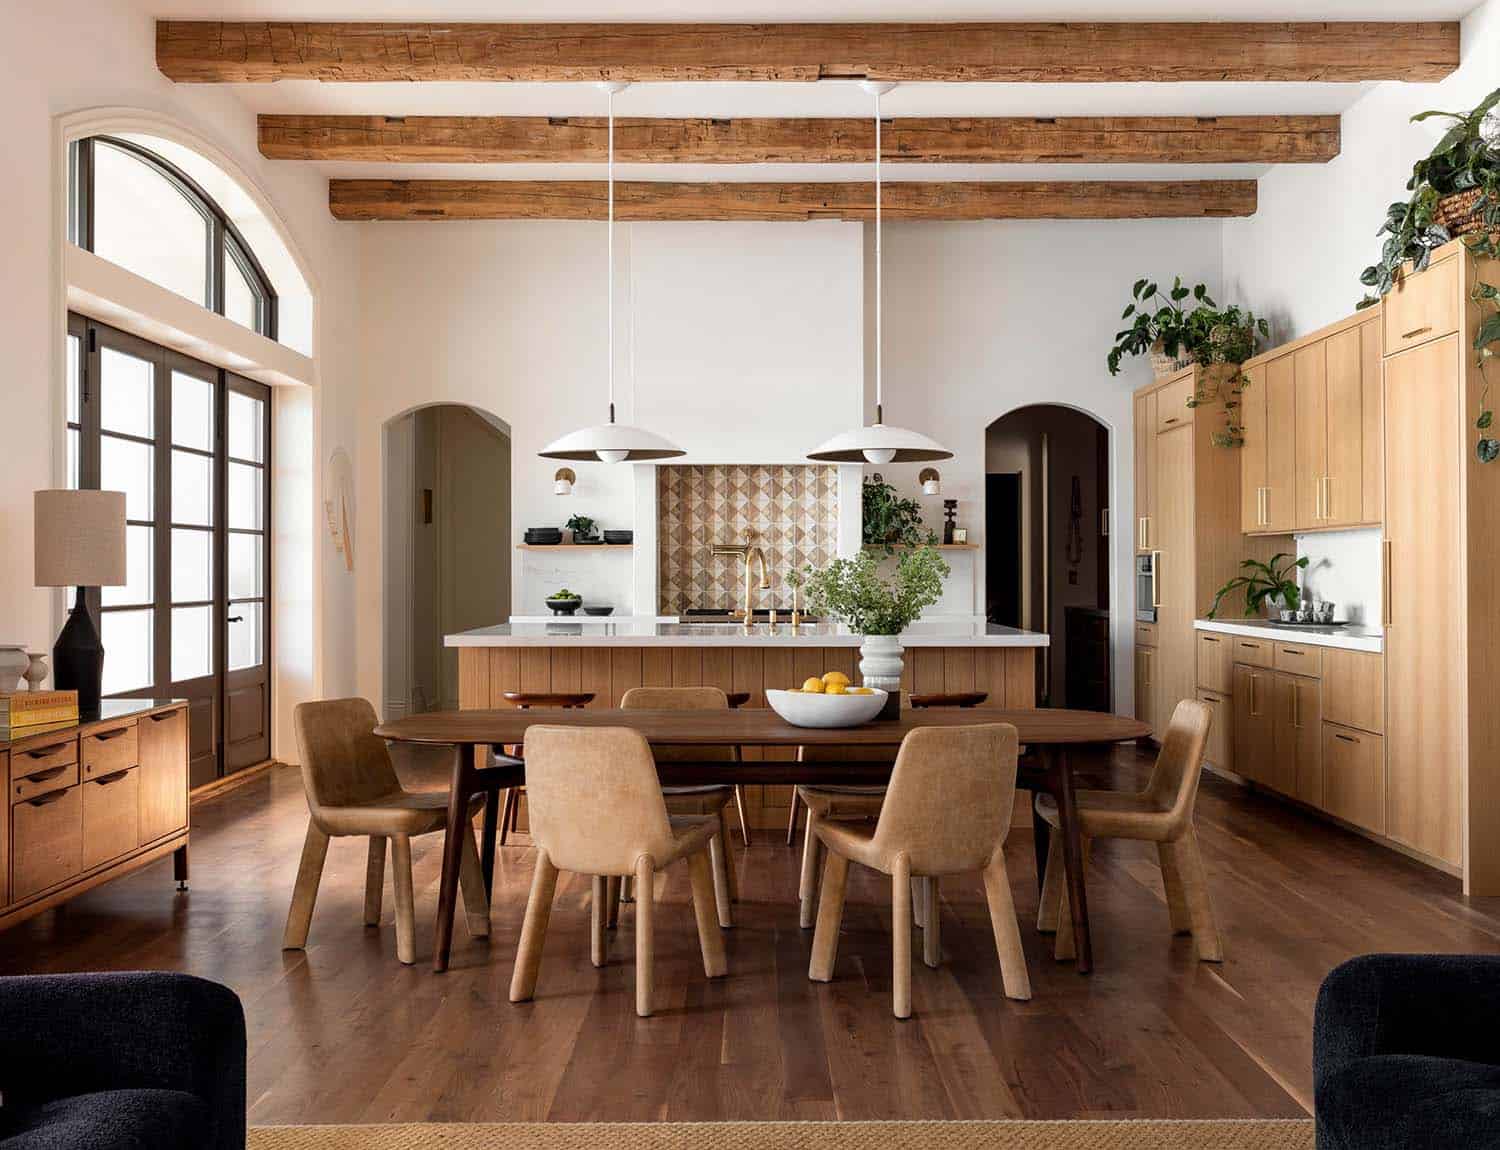 spanish colonial inspired kitchen and dining room